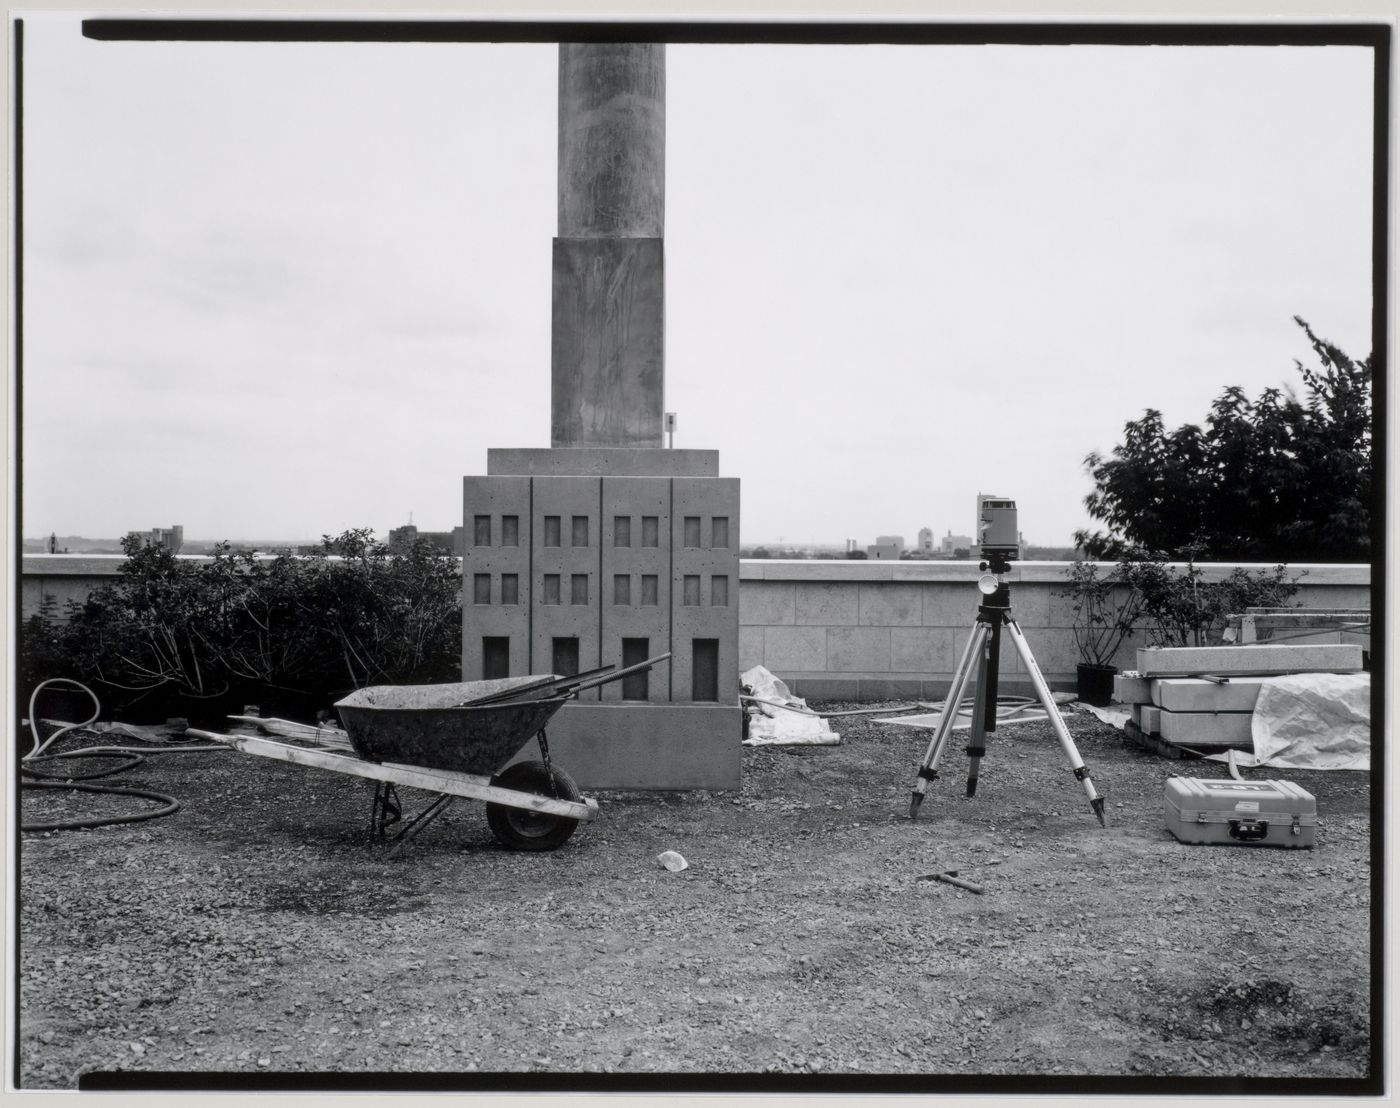 View of the Canadian Centre for Architecture Garden under construction showing an Allegorical Column, a wheelbarrow, and a measuring device mounted on a tripod, Montréal, Québec, Canada